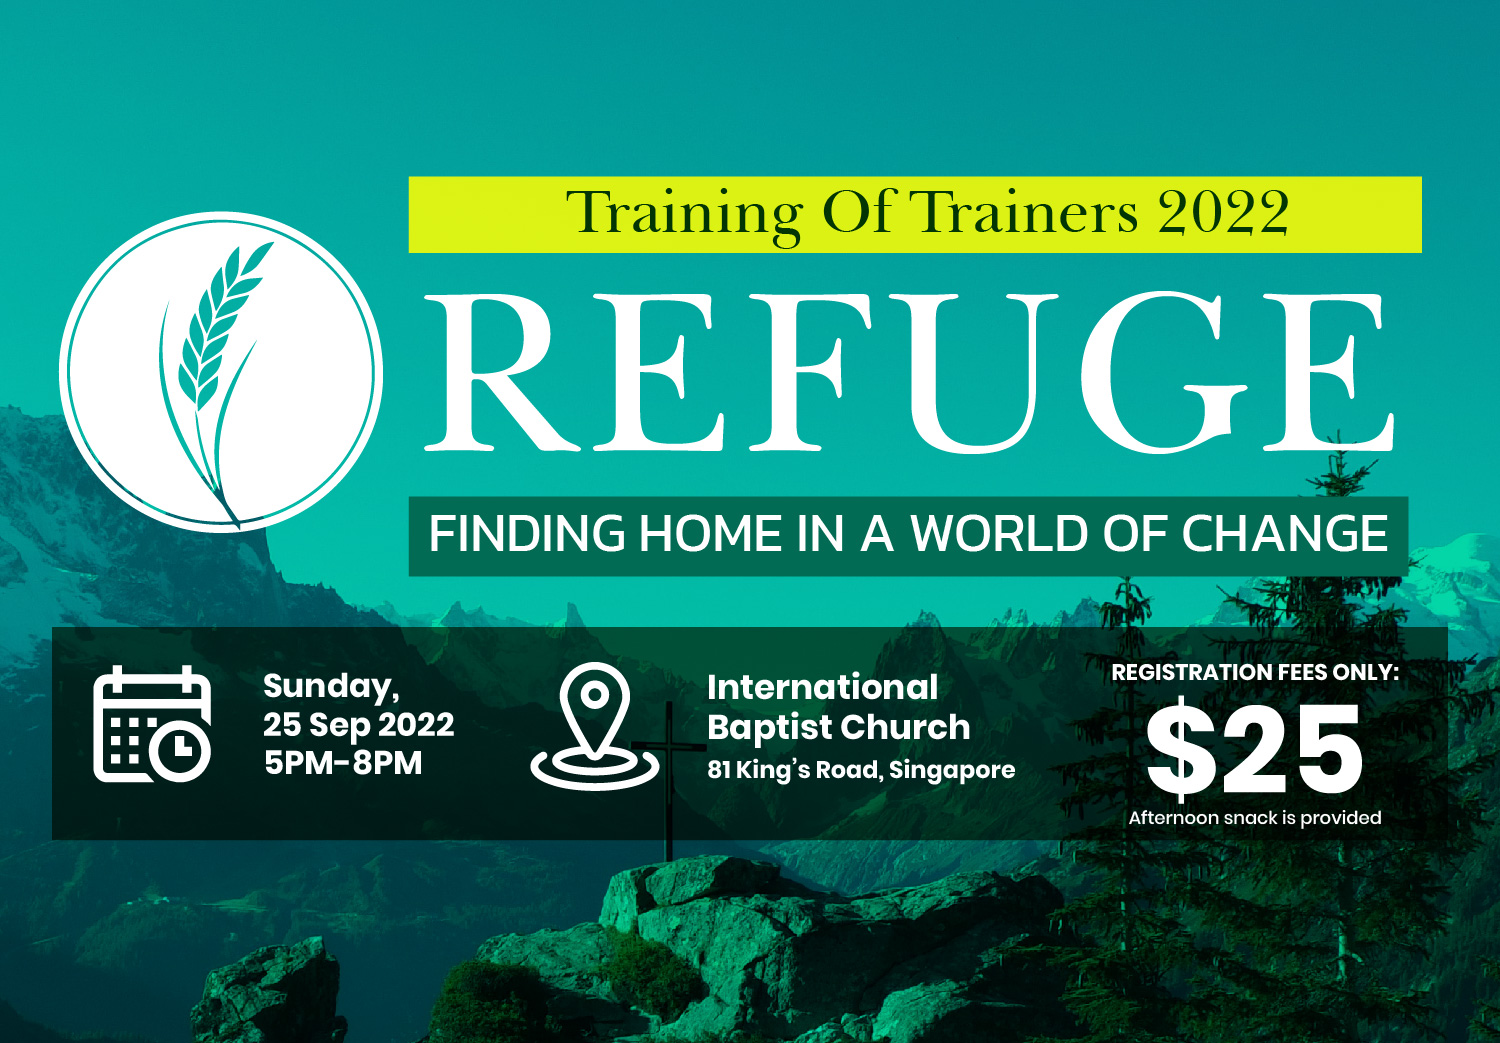 Additional Session of Refuge - Training of Trainers